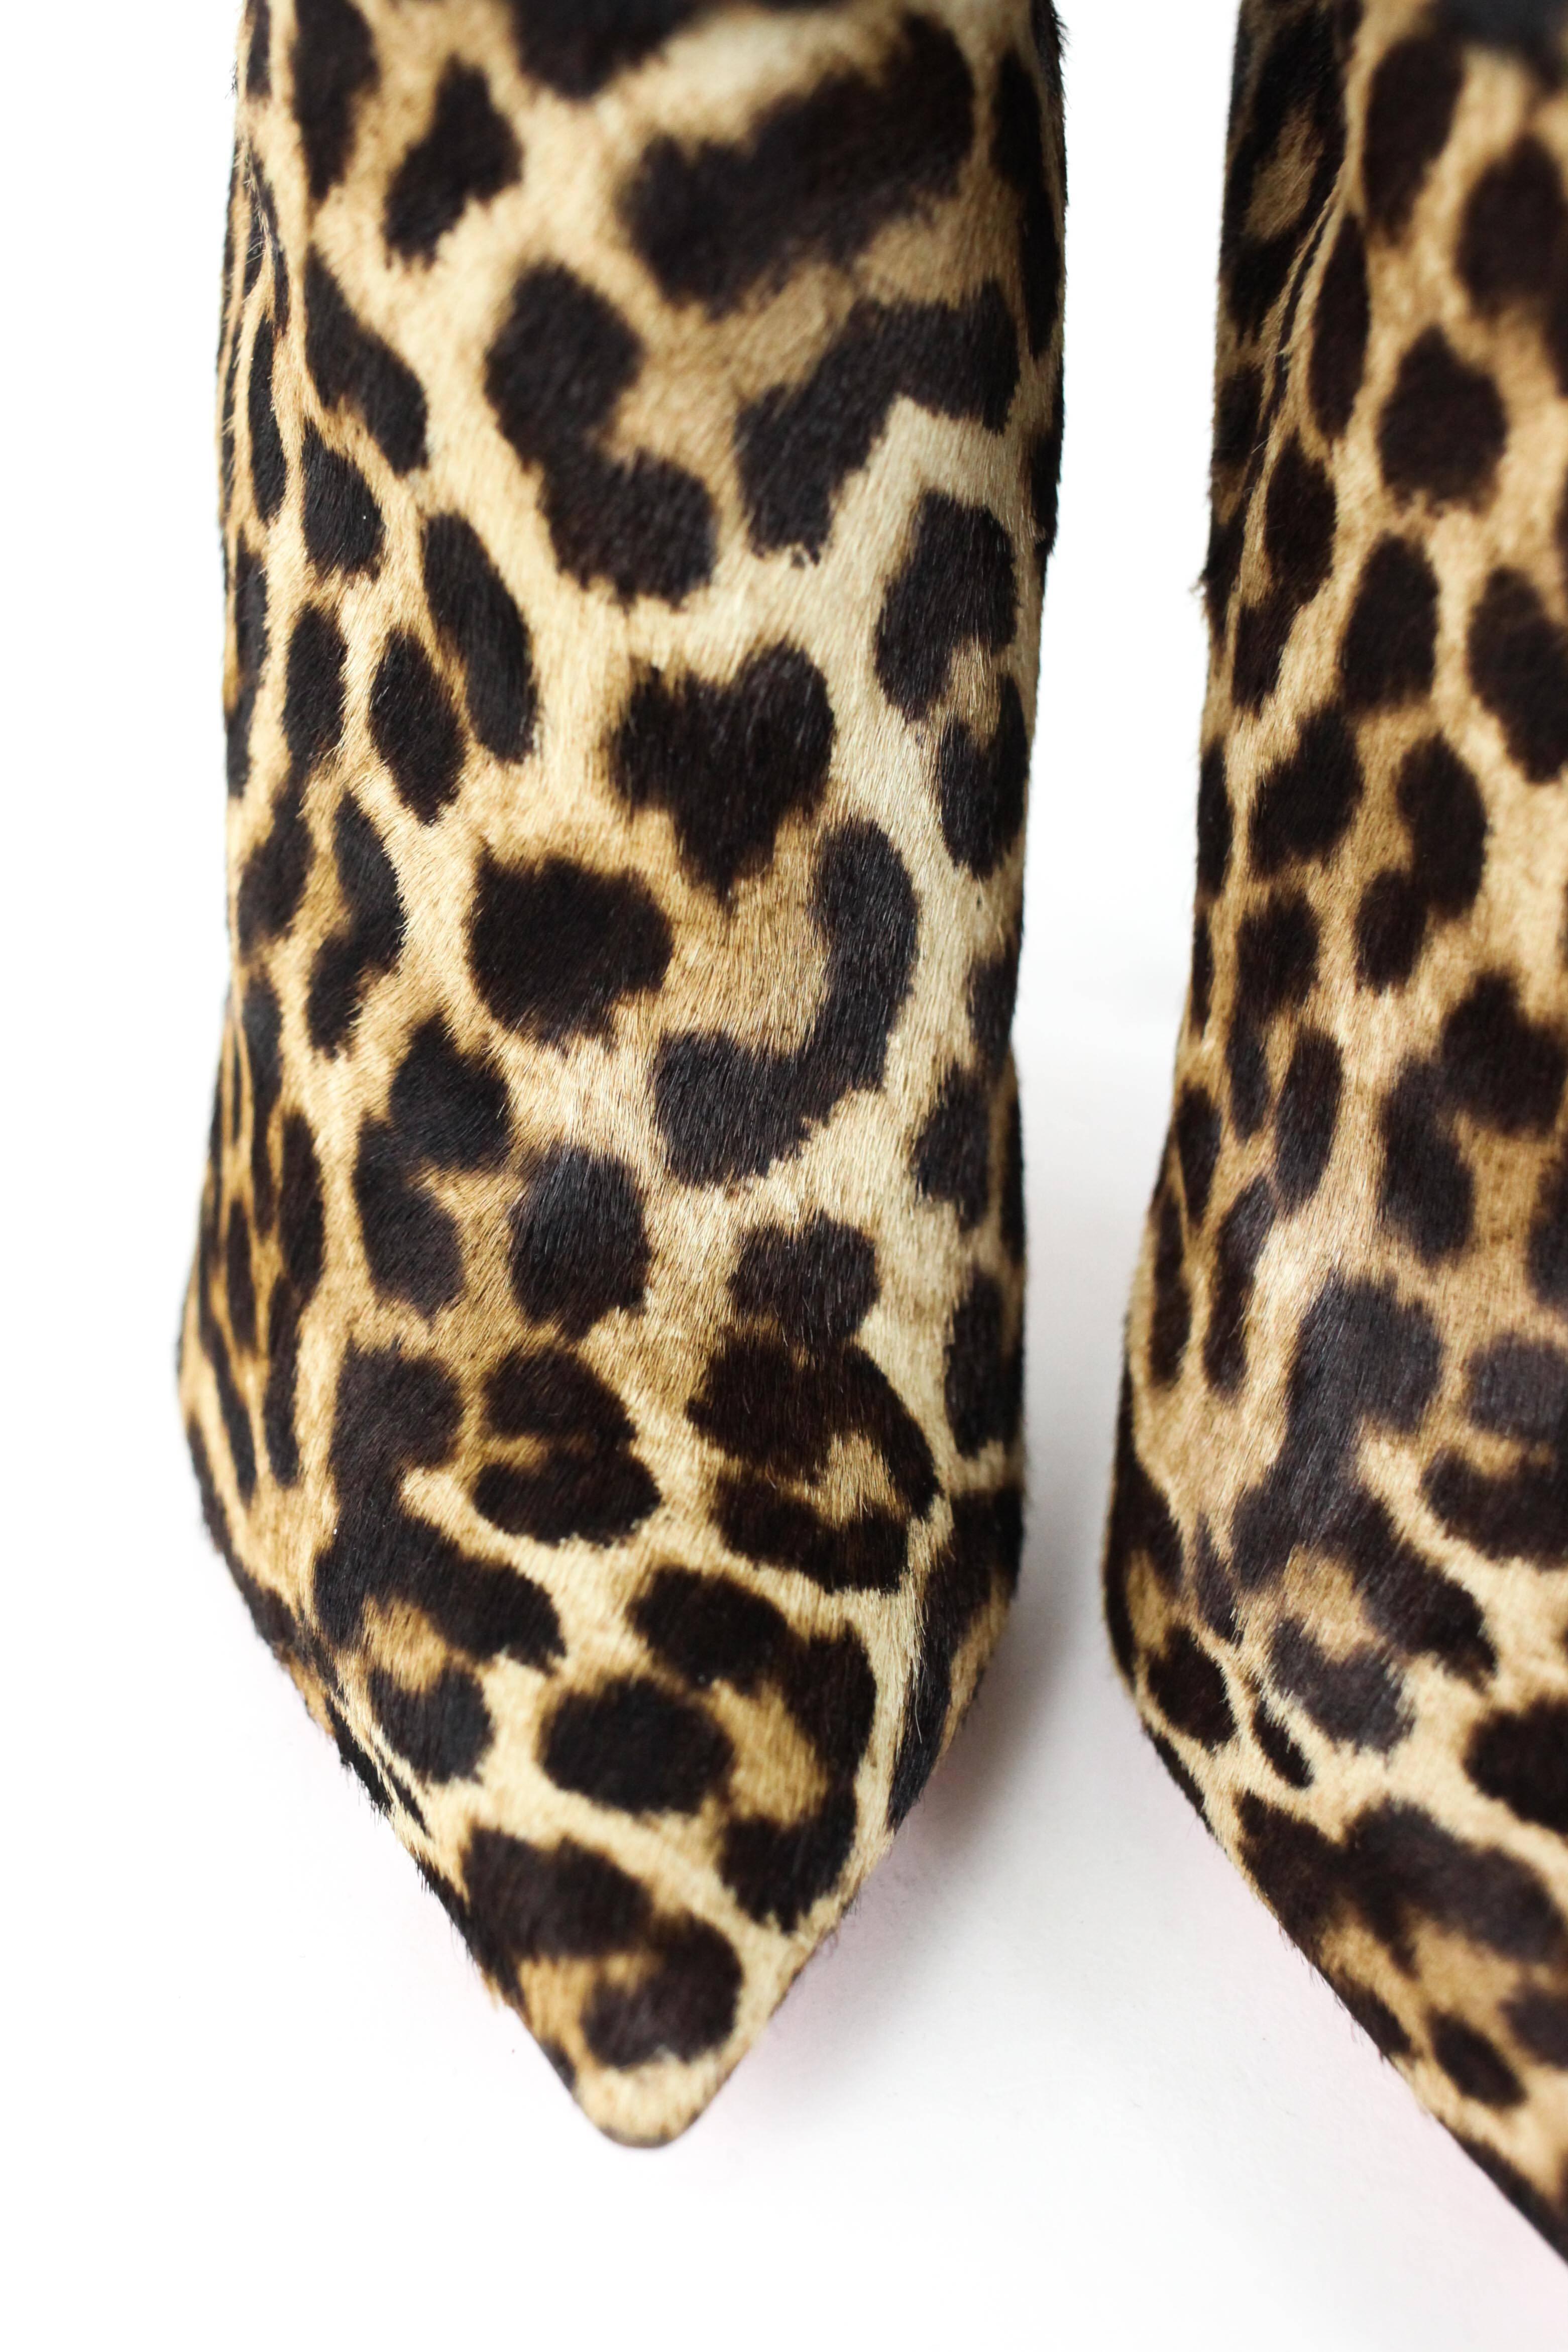 CHRISTIAN LOUBOUTIN Leopard Knee High Boots 36.5 In Excellent Condition For Sale In San Francisco, CA